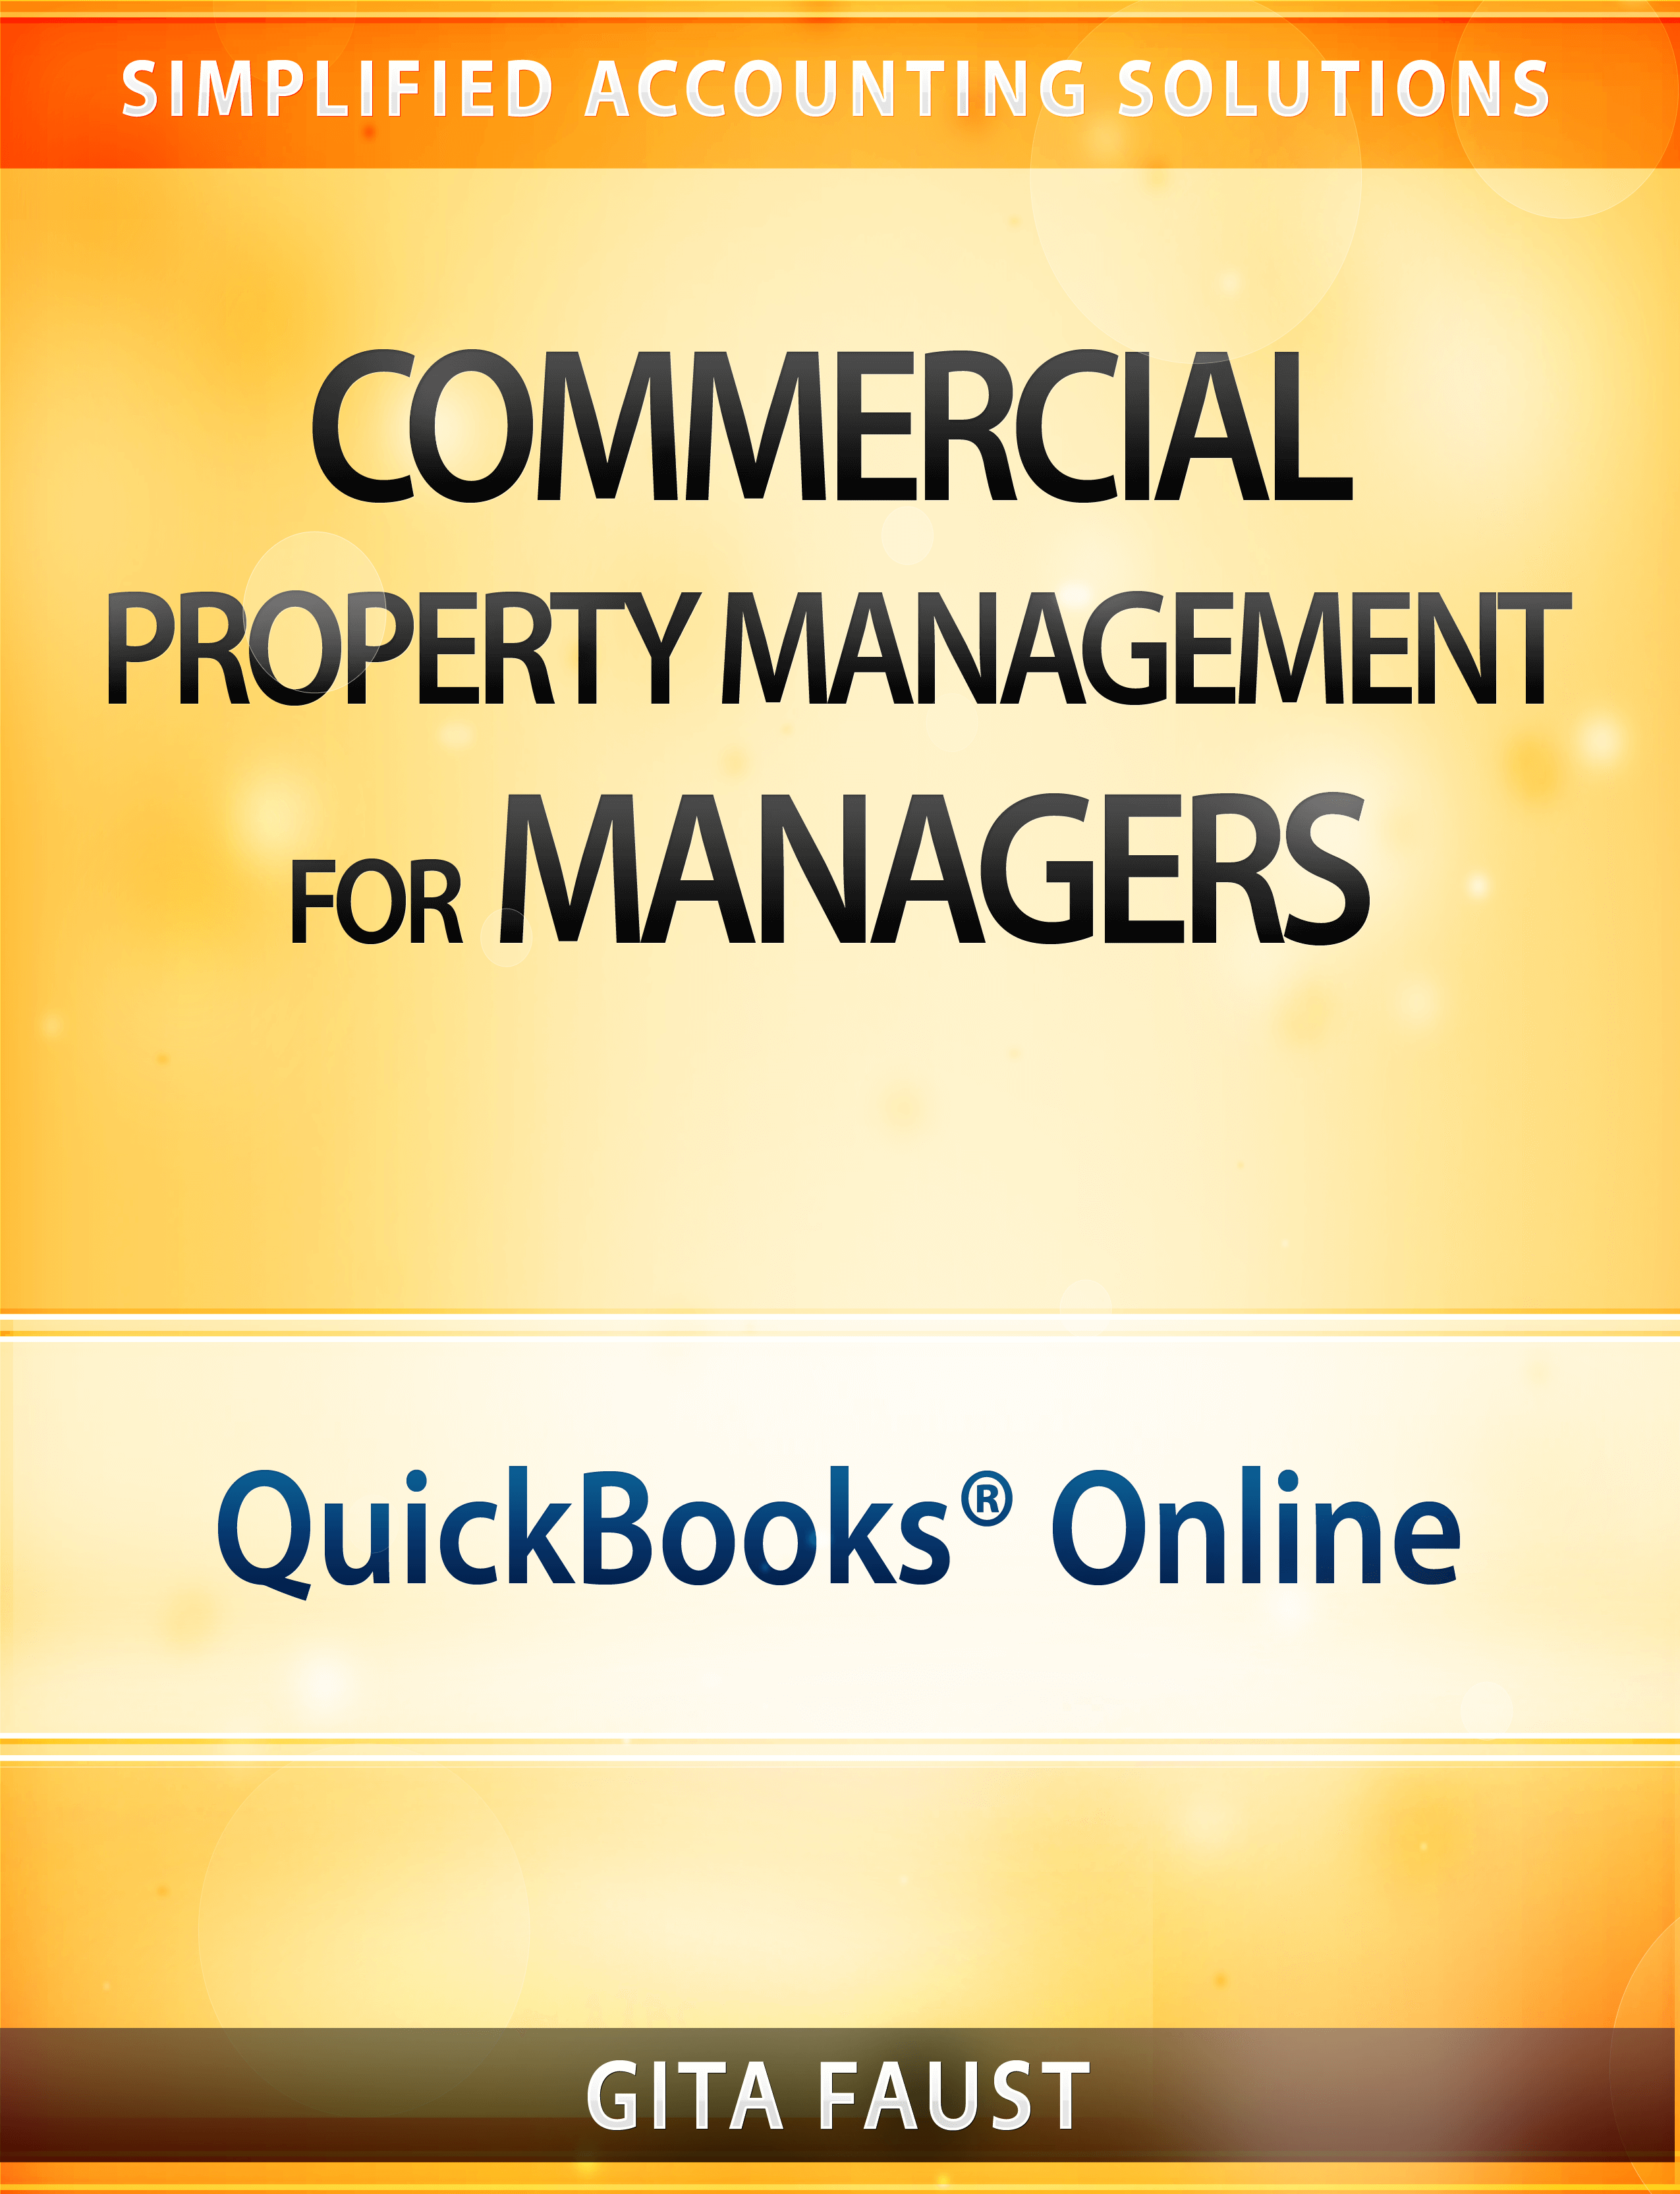 QuickBooks Online for Commercial Property Management